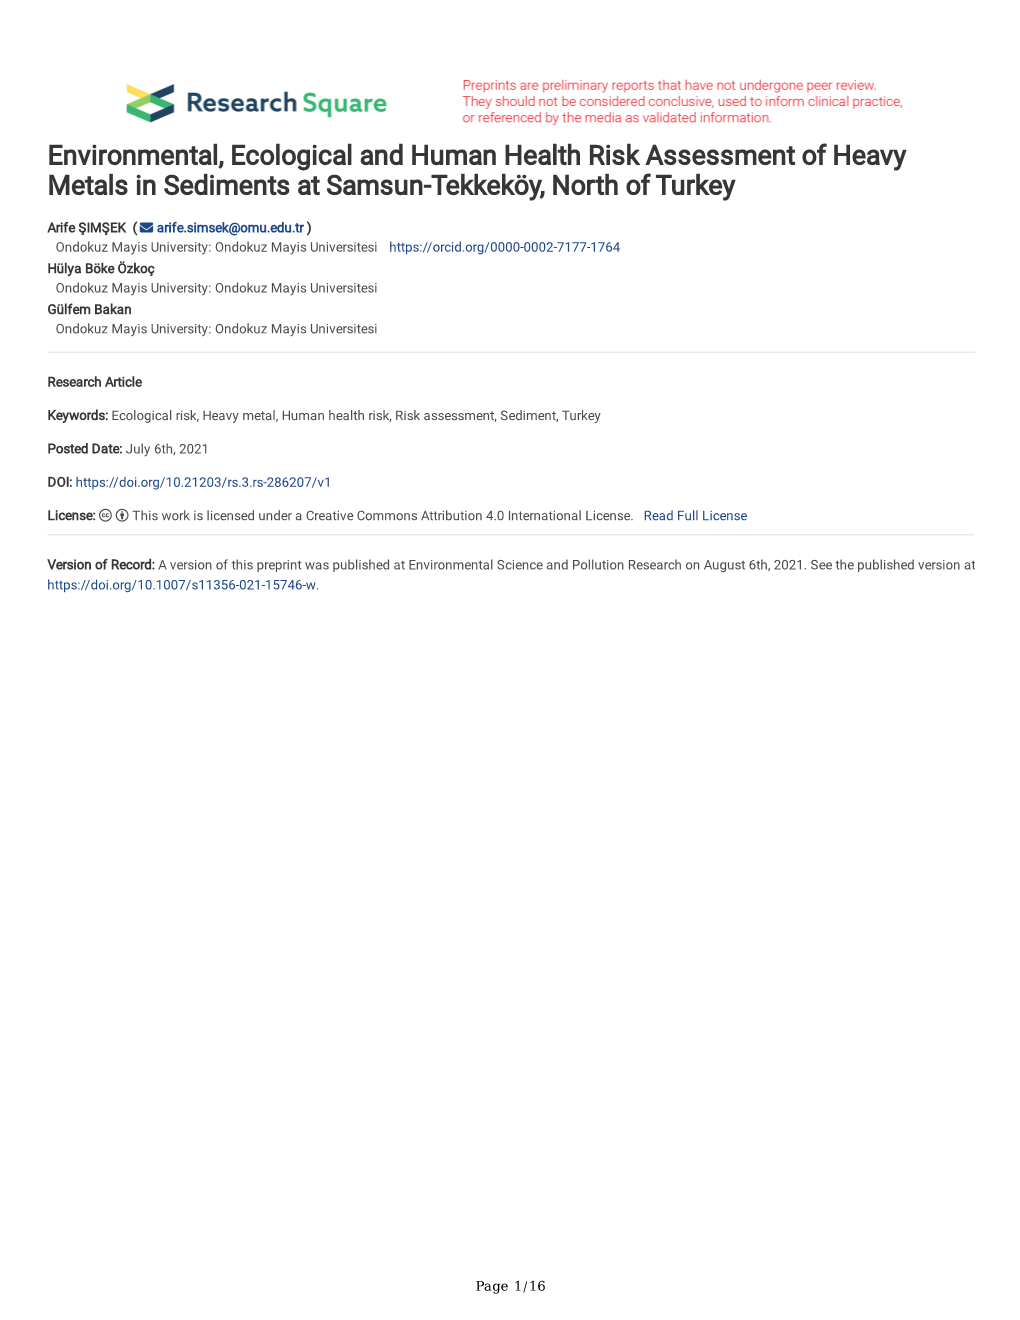 Environmental, Ecological and Human Health Risk Assessment of Heavy Metals in Sediments at Samsun-Tekkeköy, North of Turkey